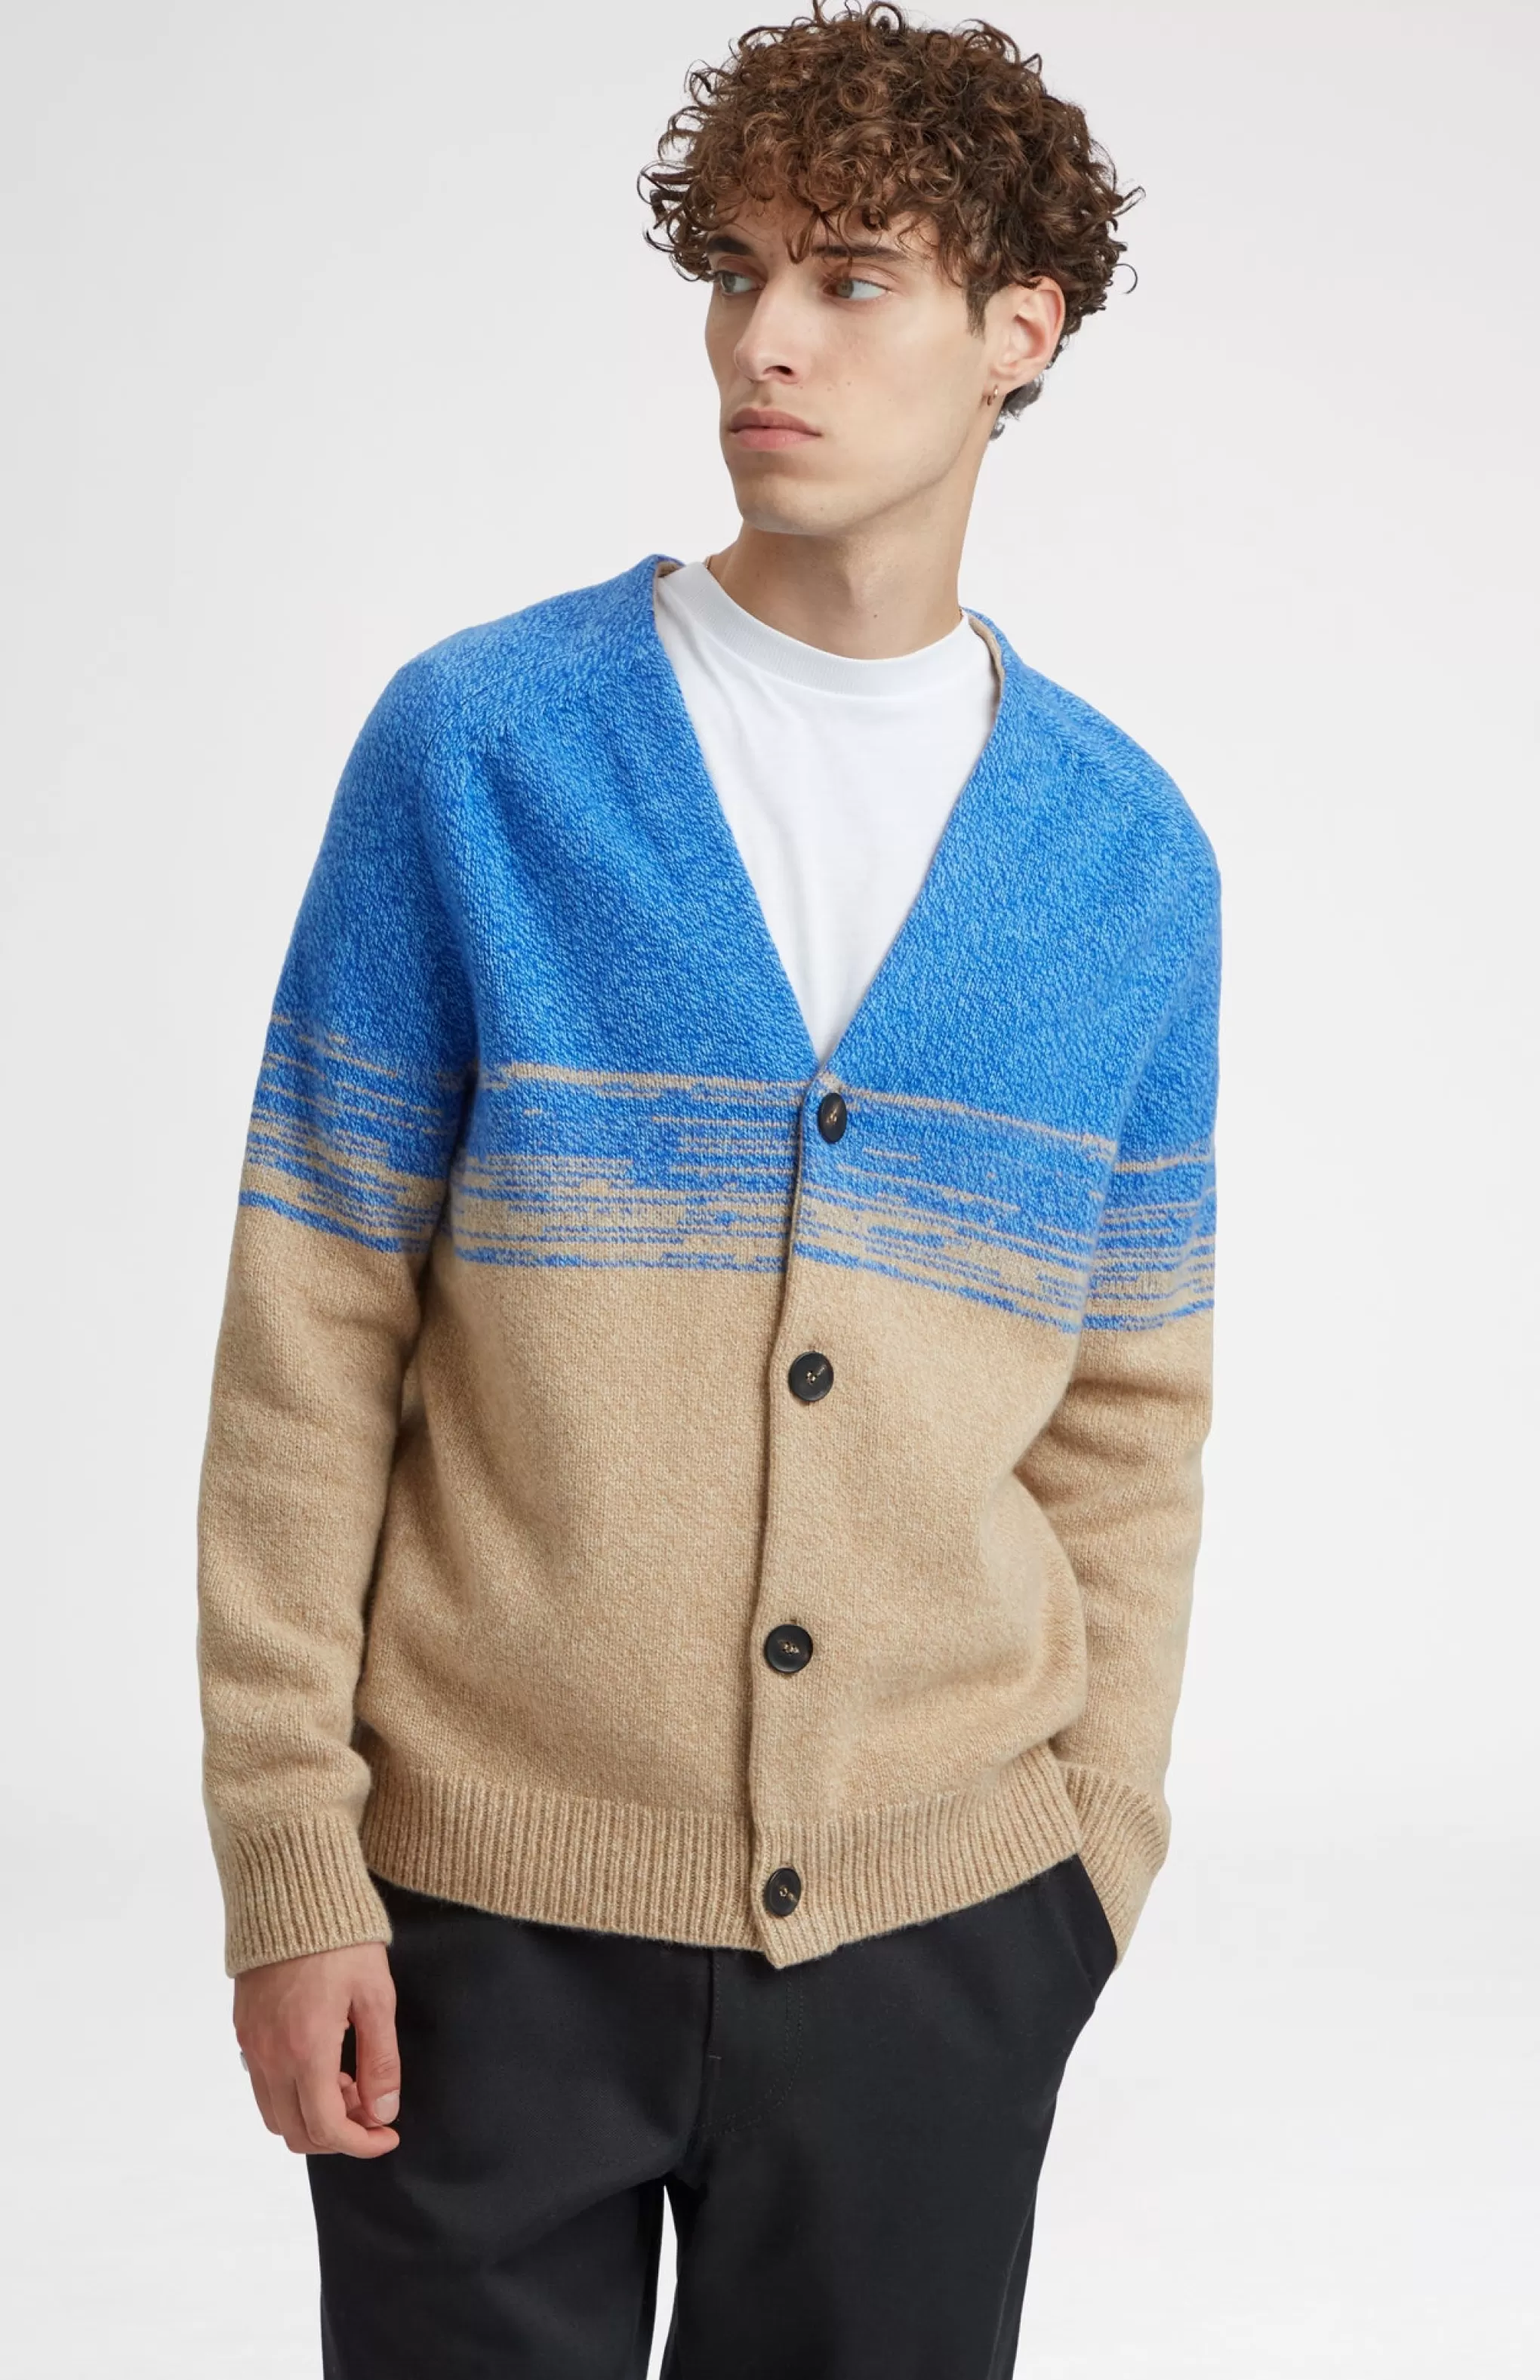 Flash Sale V Neck Lambswool Cardigan With Degrade Effect In Cobalt And Camel Men Medium Weight Knits